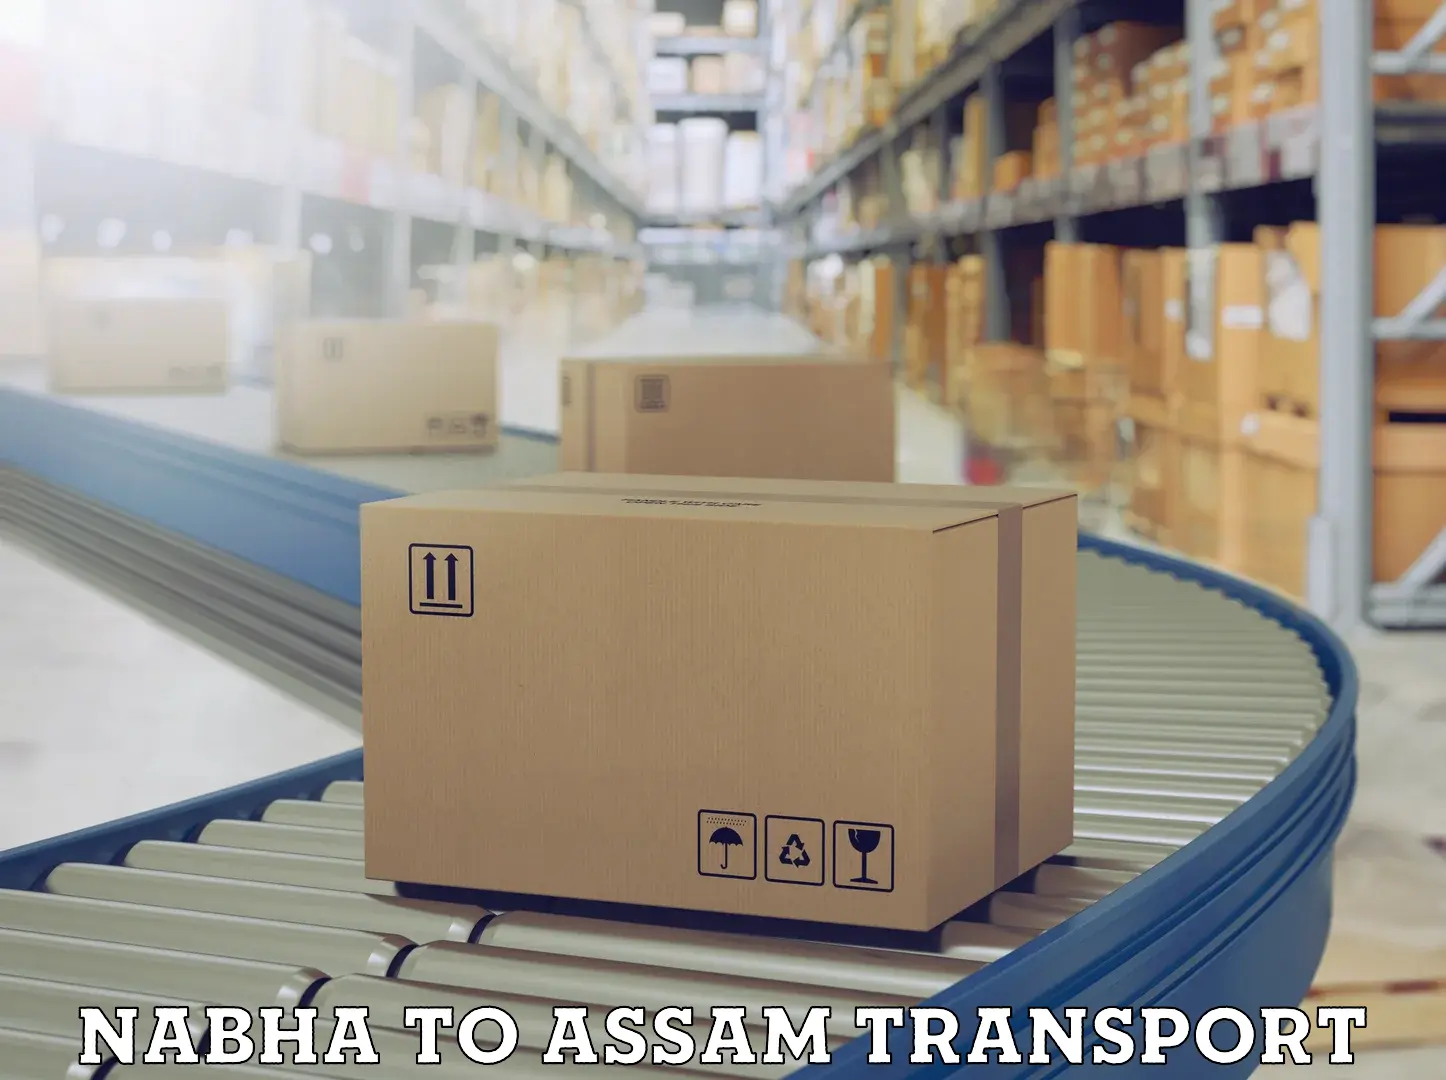 Container transport service Nabha to Assam